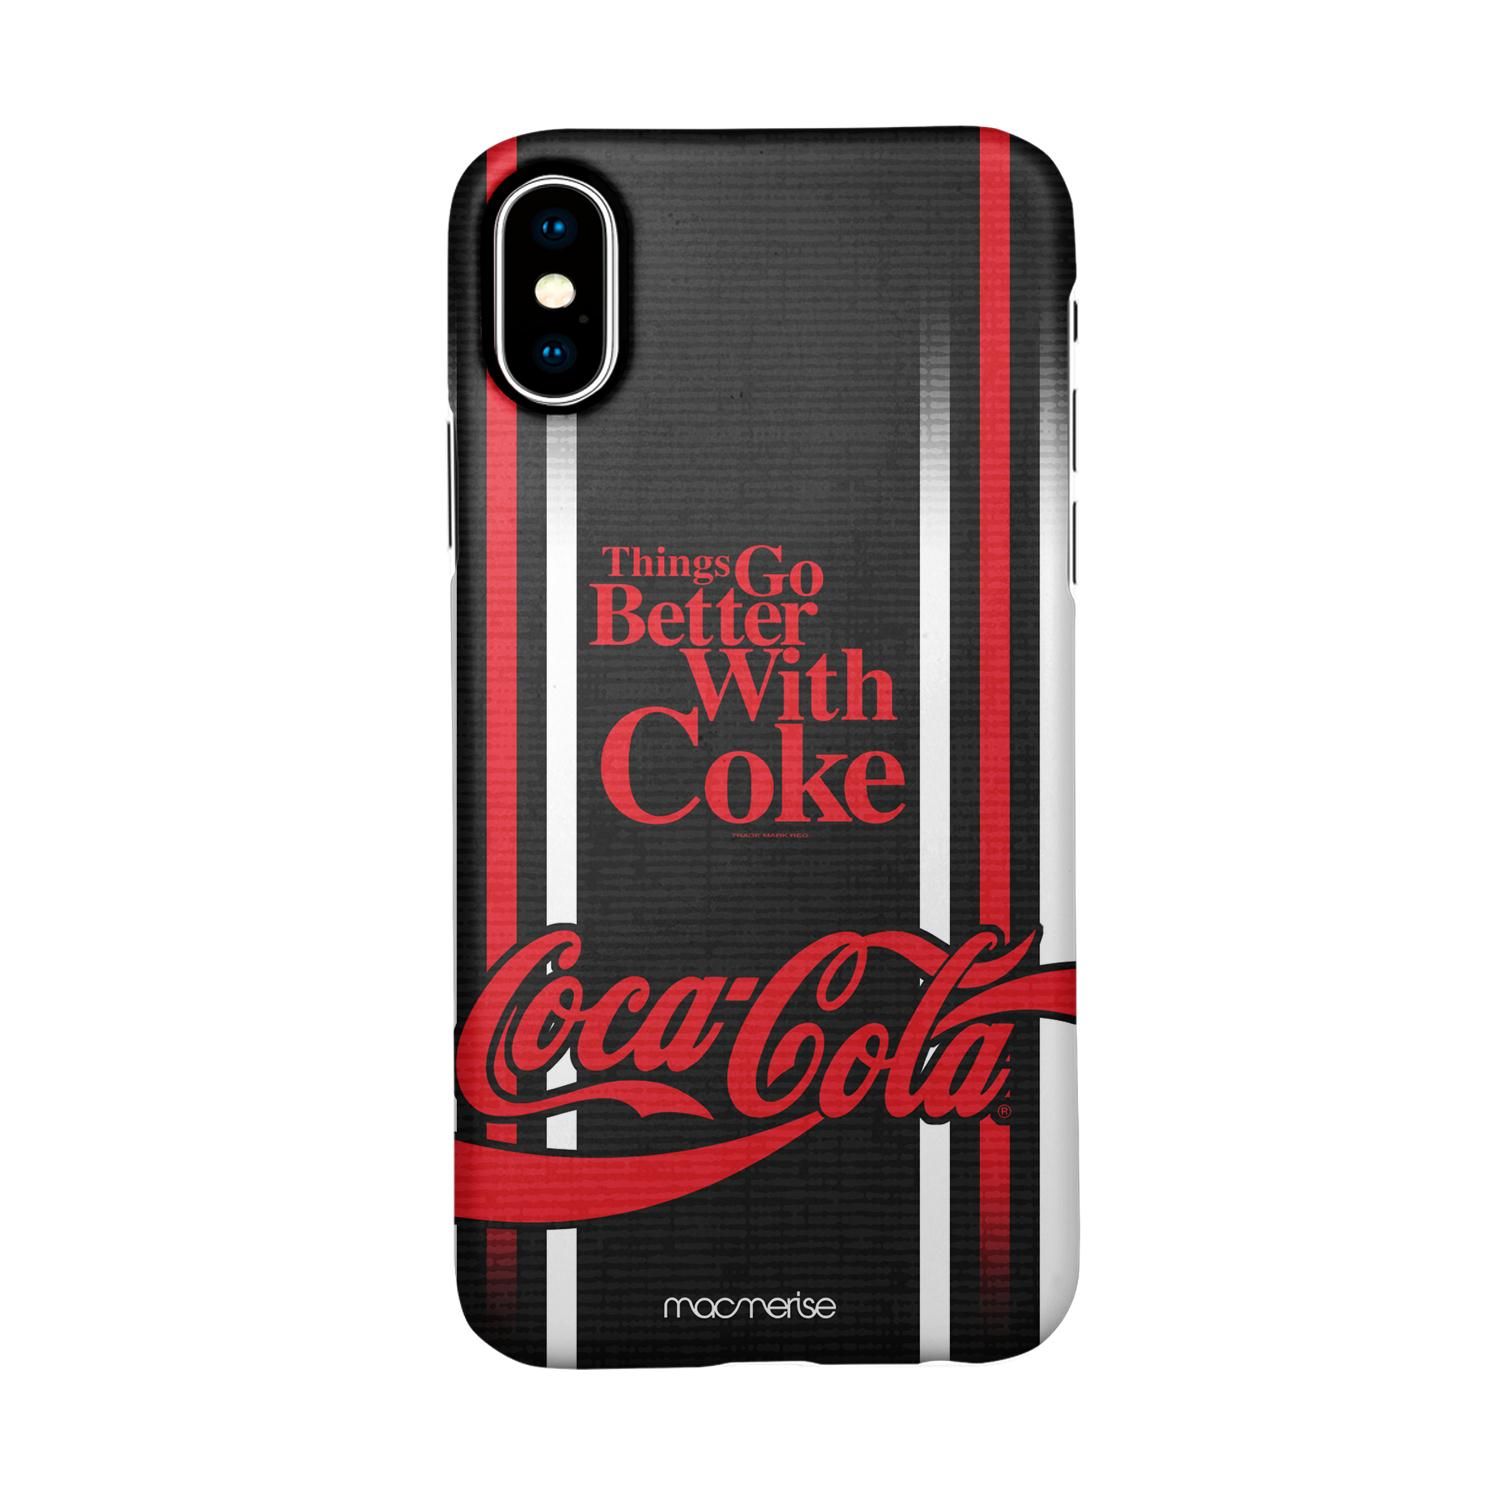 Better With Coke Black - Sleek Phone Case for iPhone X